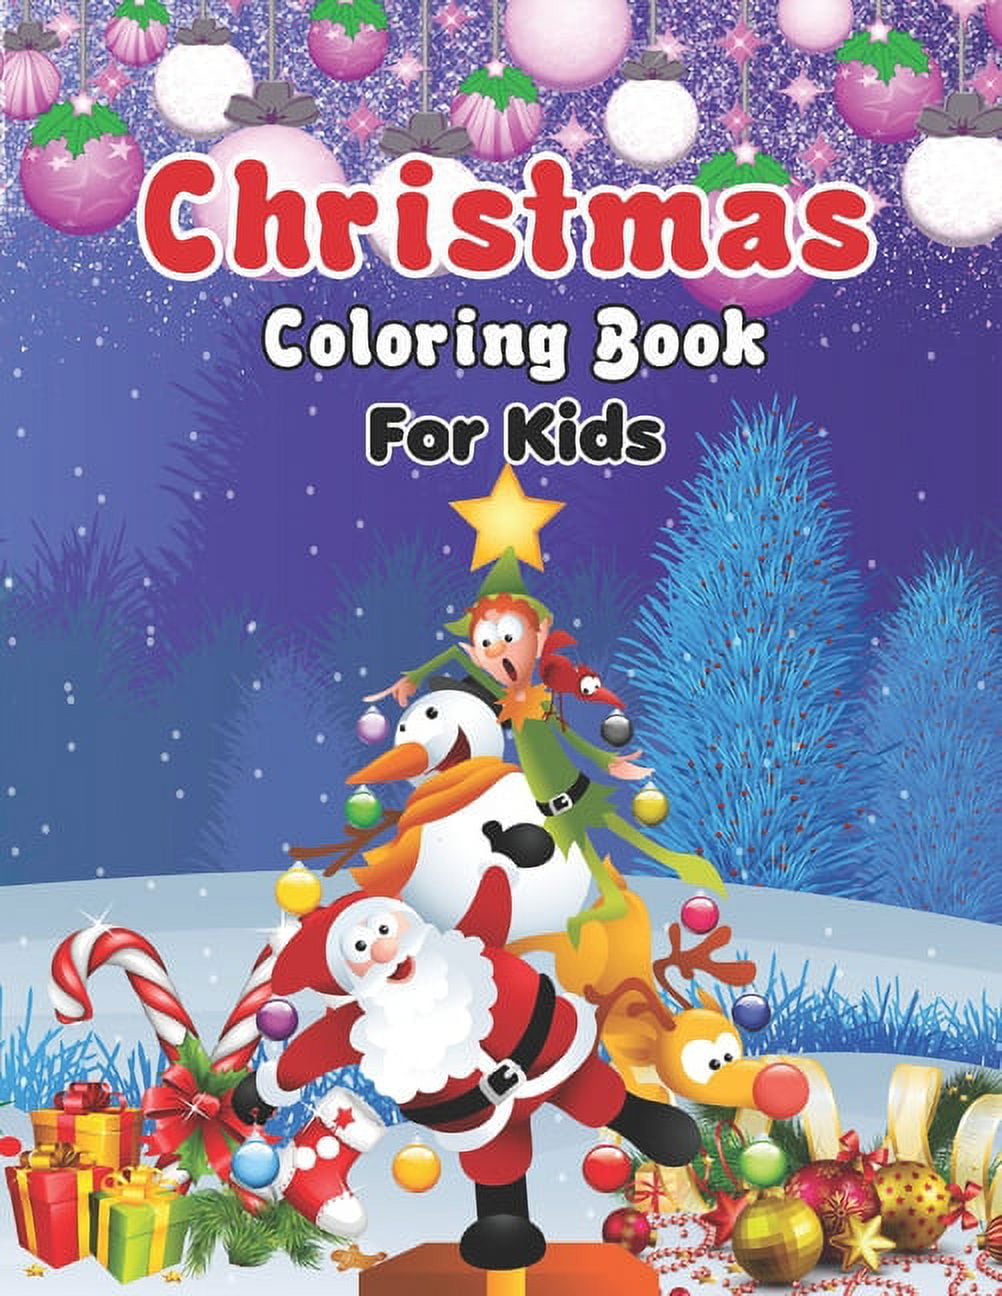 Christmas Coloring Books Bulk Assortment for Kids Toddlers -- 12 Holiday Christmas Activity Books with Stickers, Games, Puzzles, Mazes and More